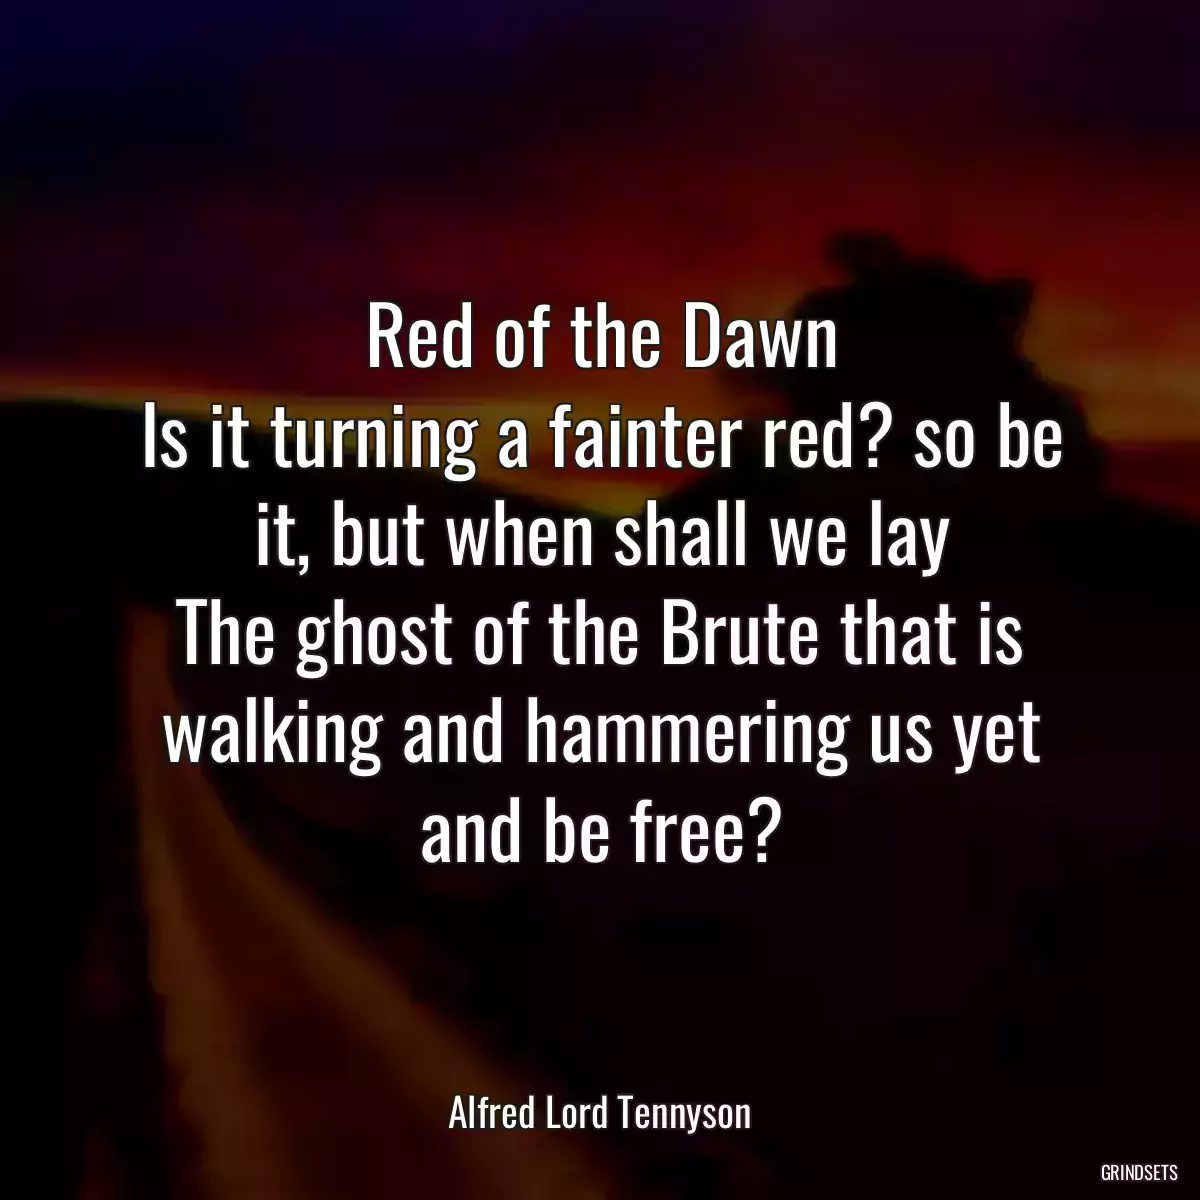 Red of the Dawn
Is it turning a fainter red? so be it, but when shall we lay
The ghost of the Brute that is walking and hammering us yet and be free?